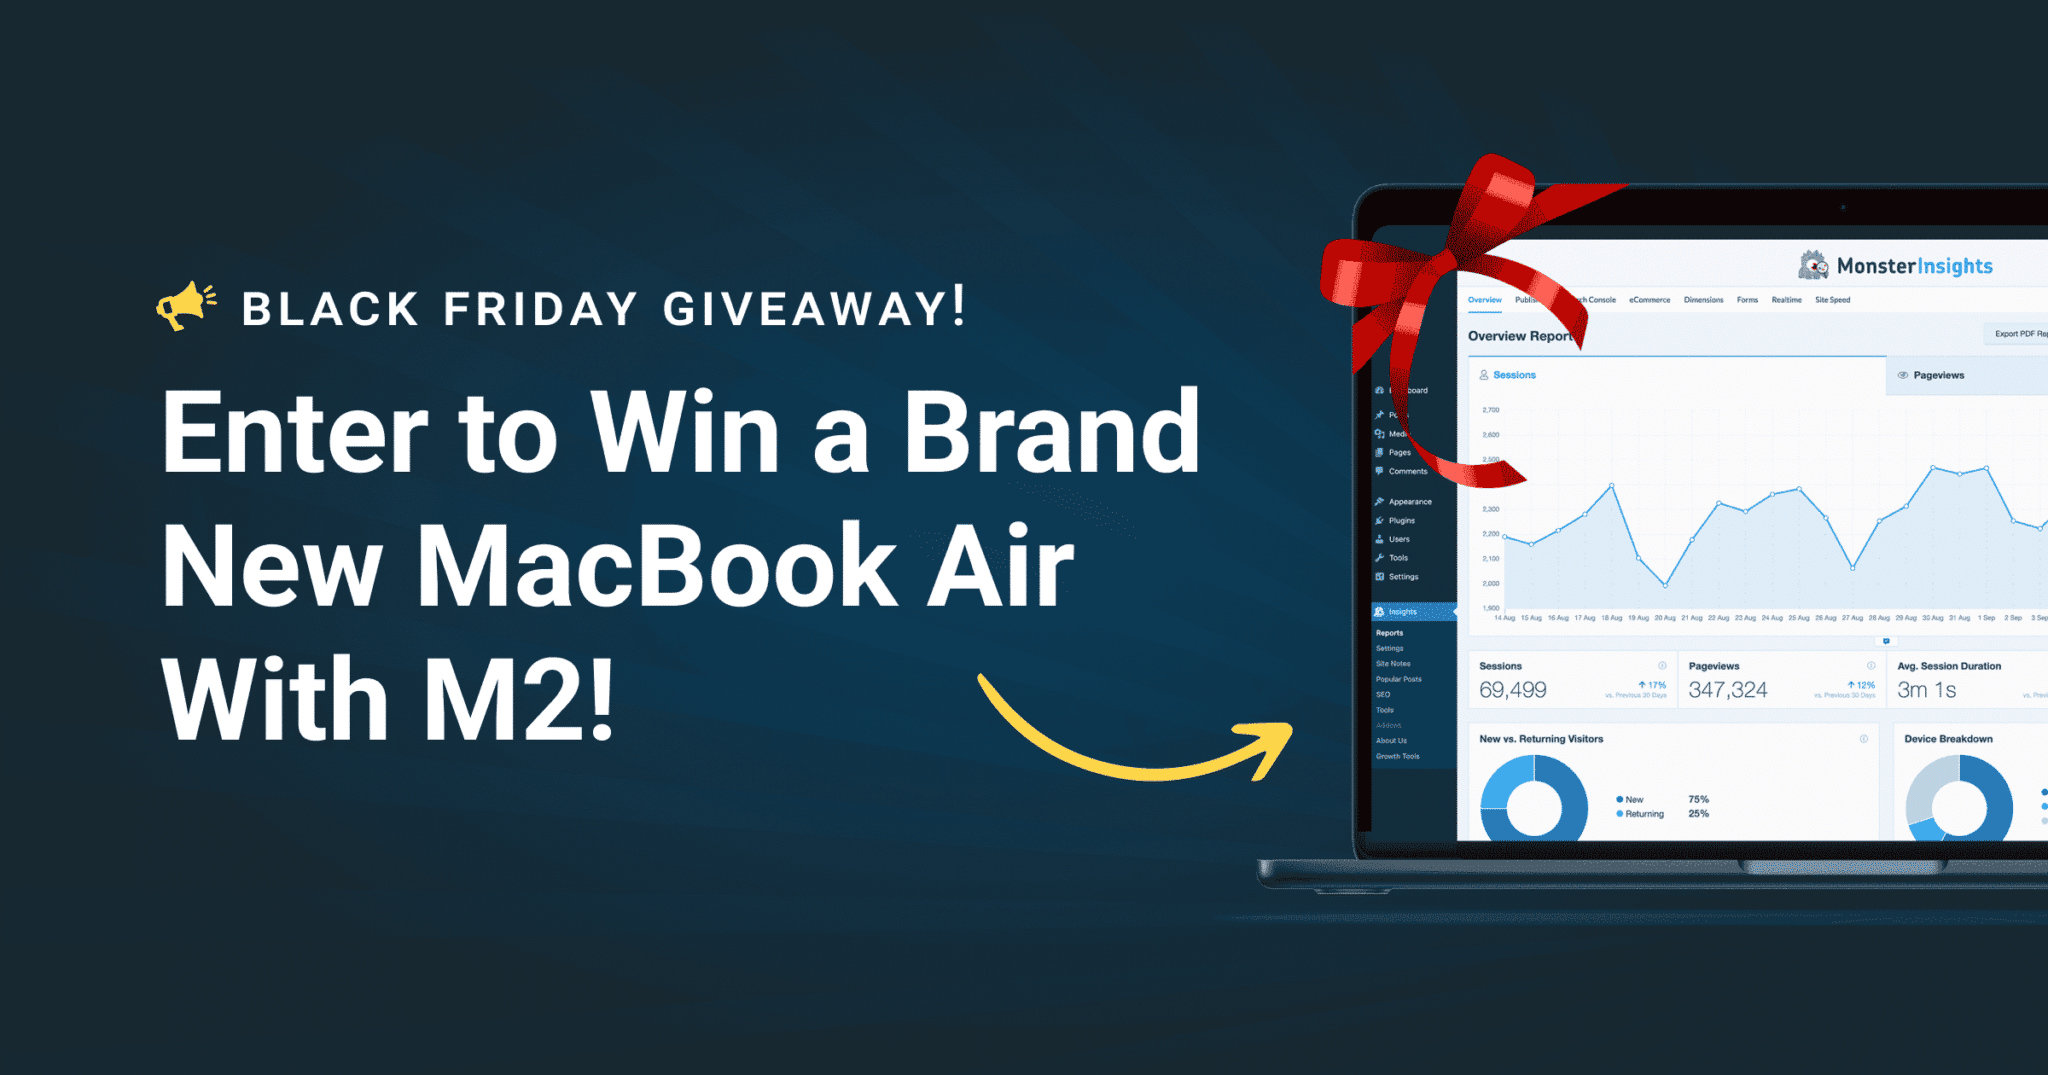 Win Brand New M2 Macbook Air - Black Friday Giveaway